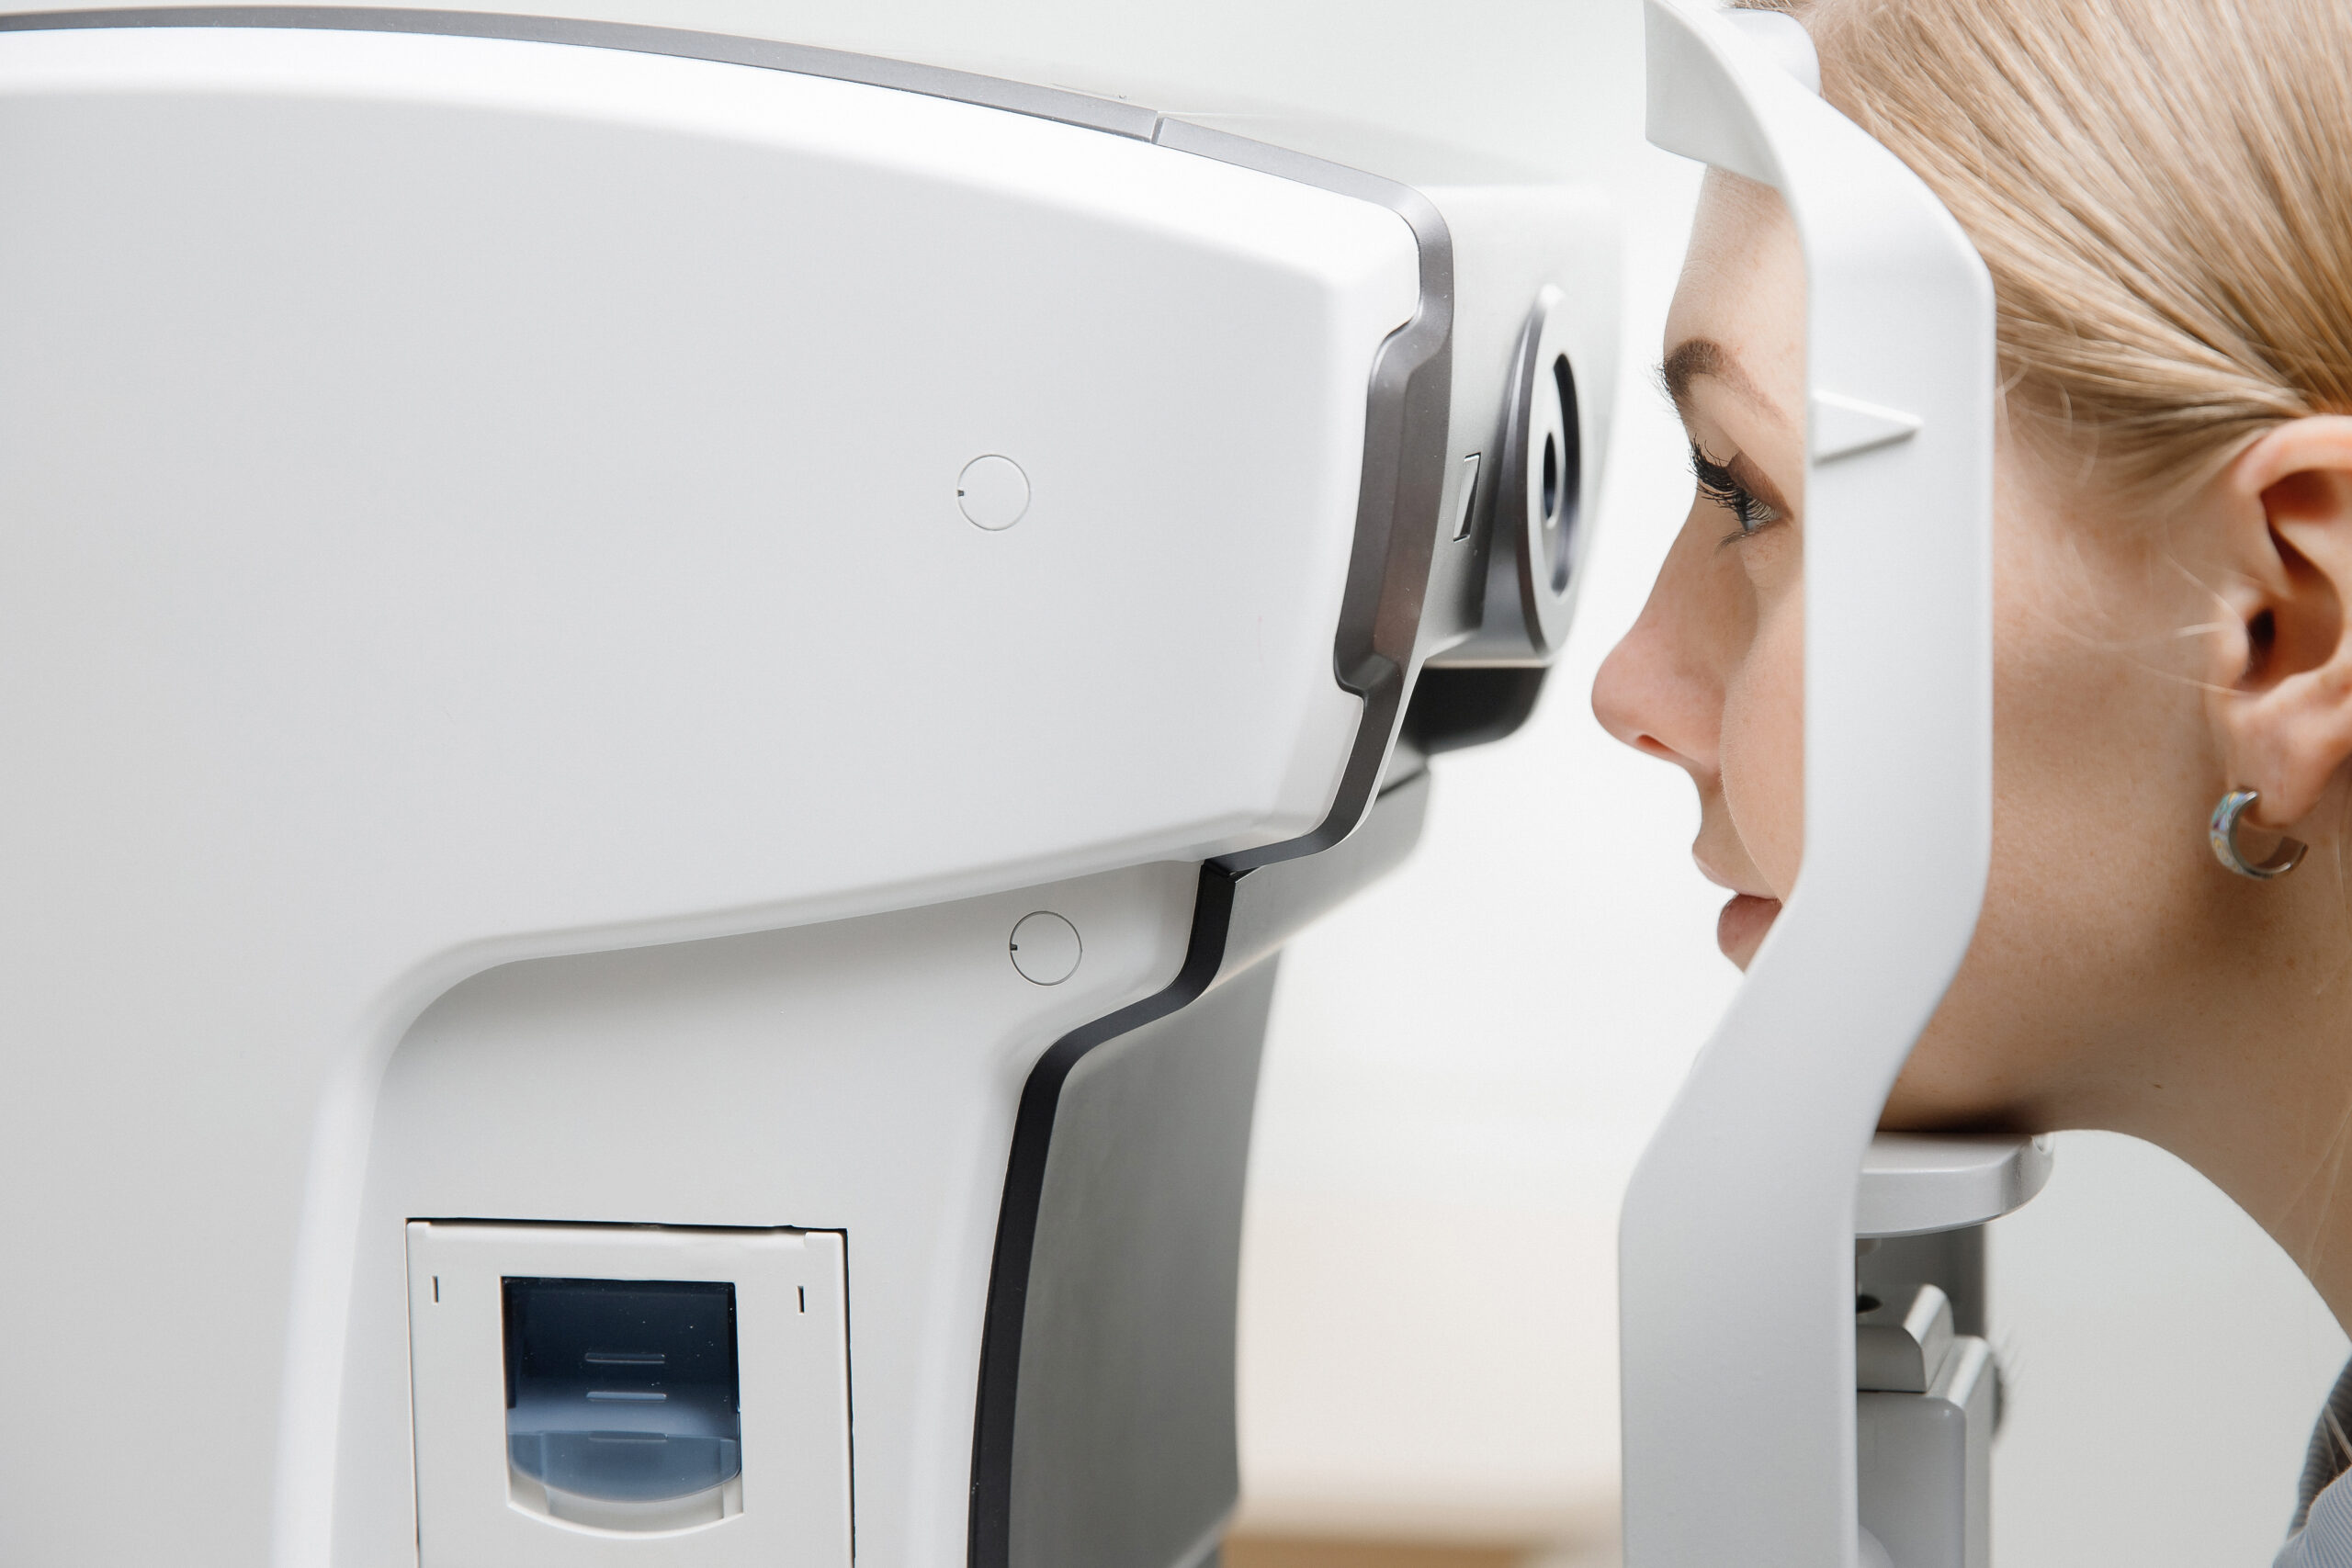 Glaucoma Awareness Month: Know Your Risks